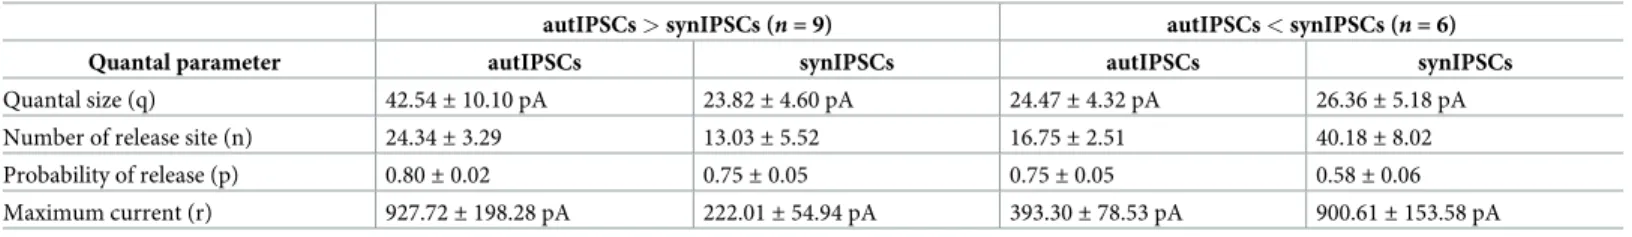 Table 4. Bayesian quantal analysis in PV-PV pairs with both autaptic and synaptic connections.